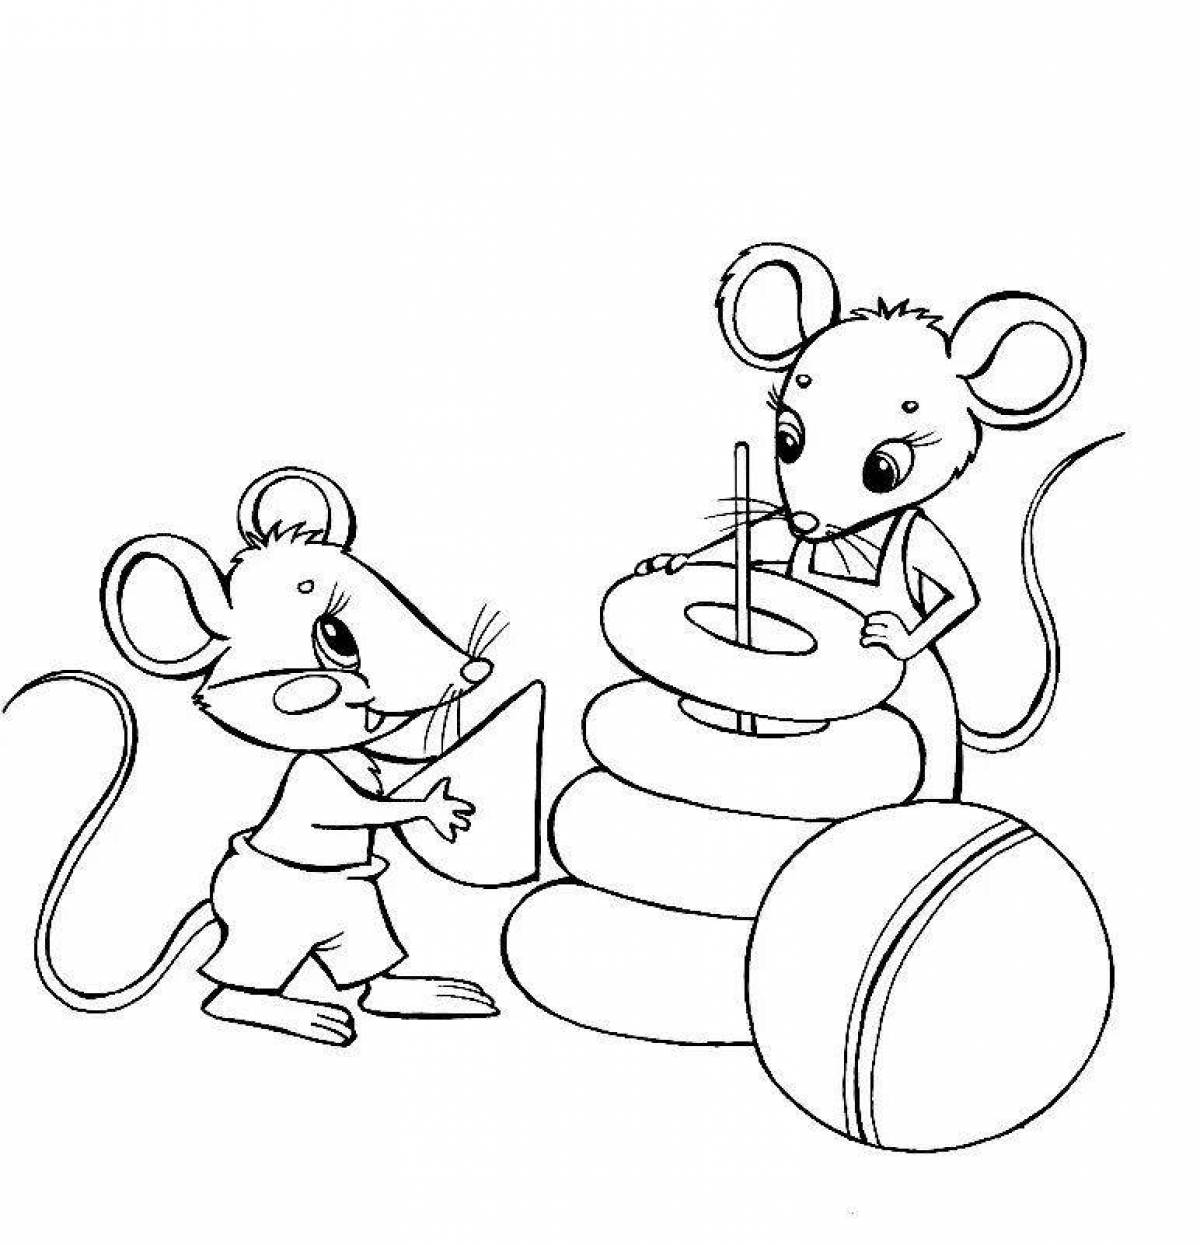 Mouse tim #6